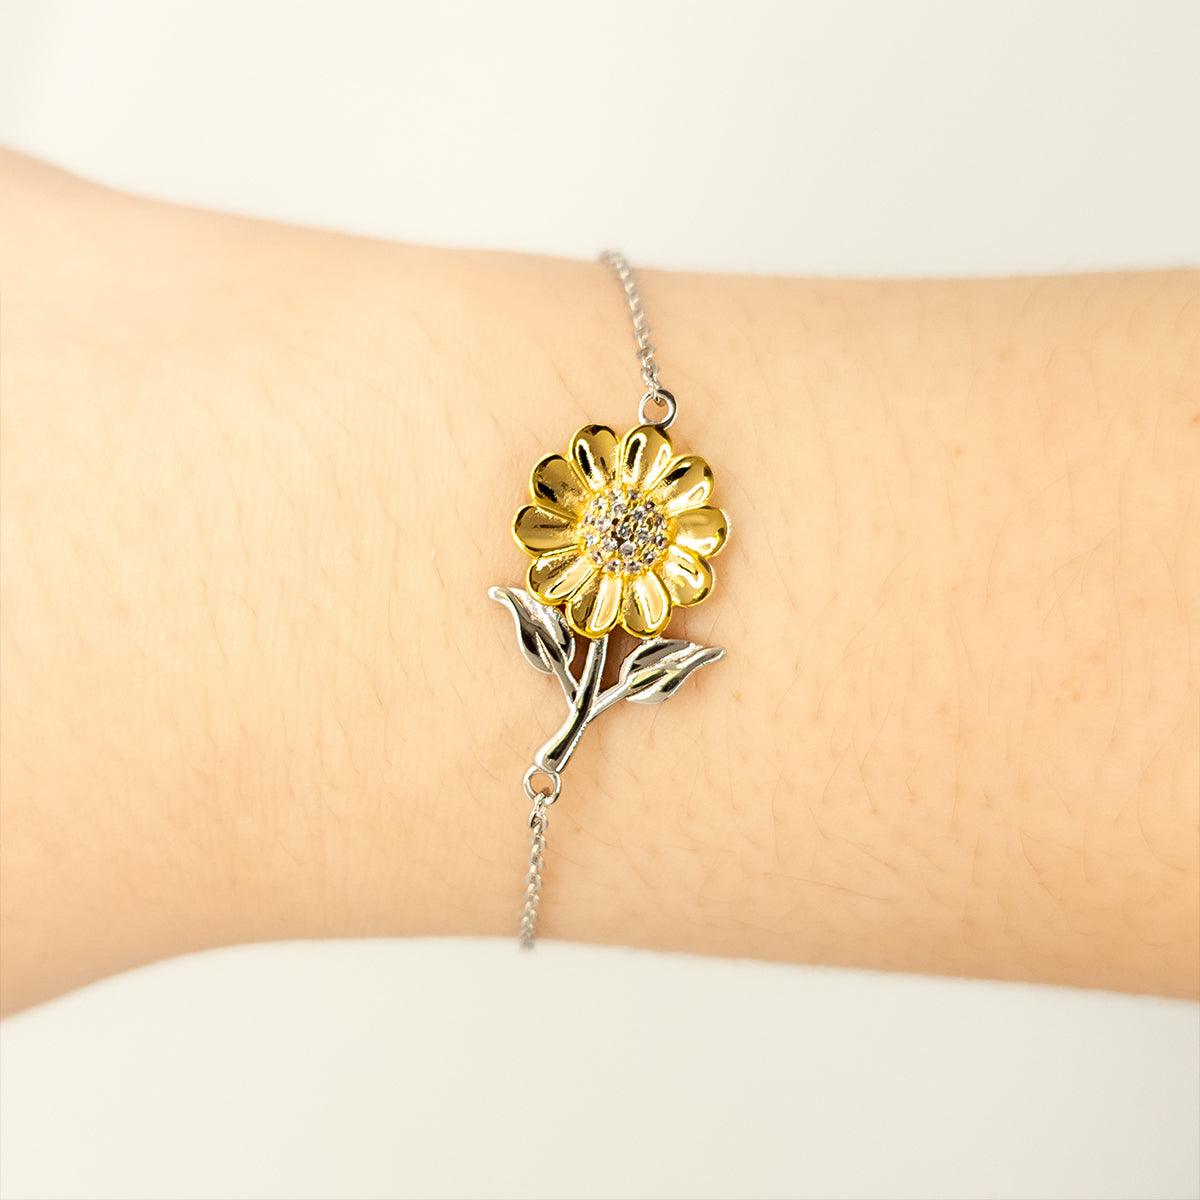 Obstetrician Sunflower Bracelet - Thanks for being who you are - Birthday Christmas Jewelry Gifts Coworkers Colleague Boss - Mallard Moon Gift Shop